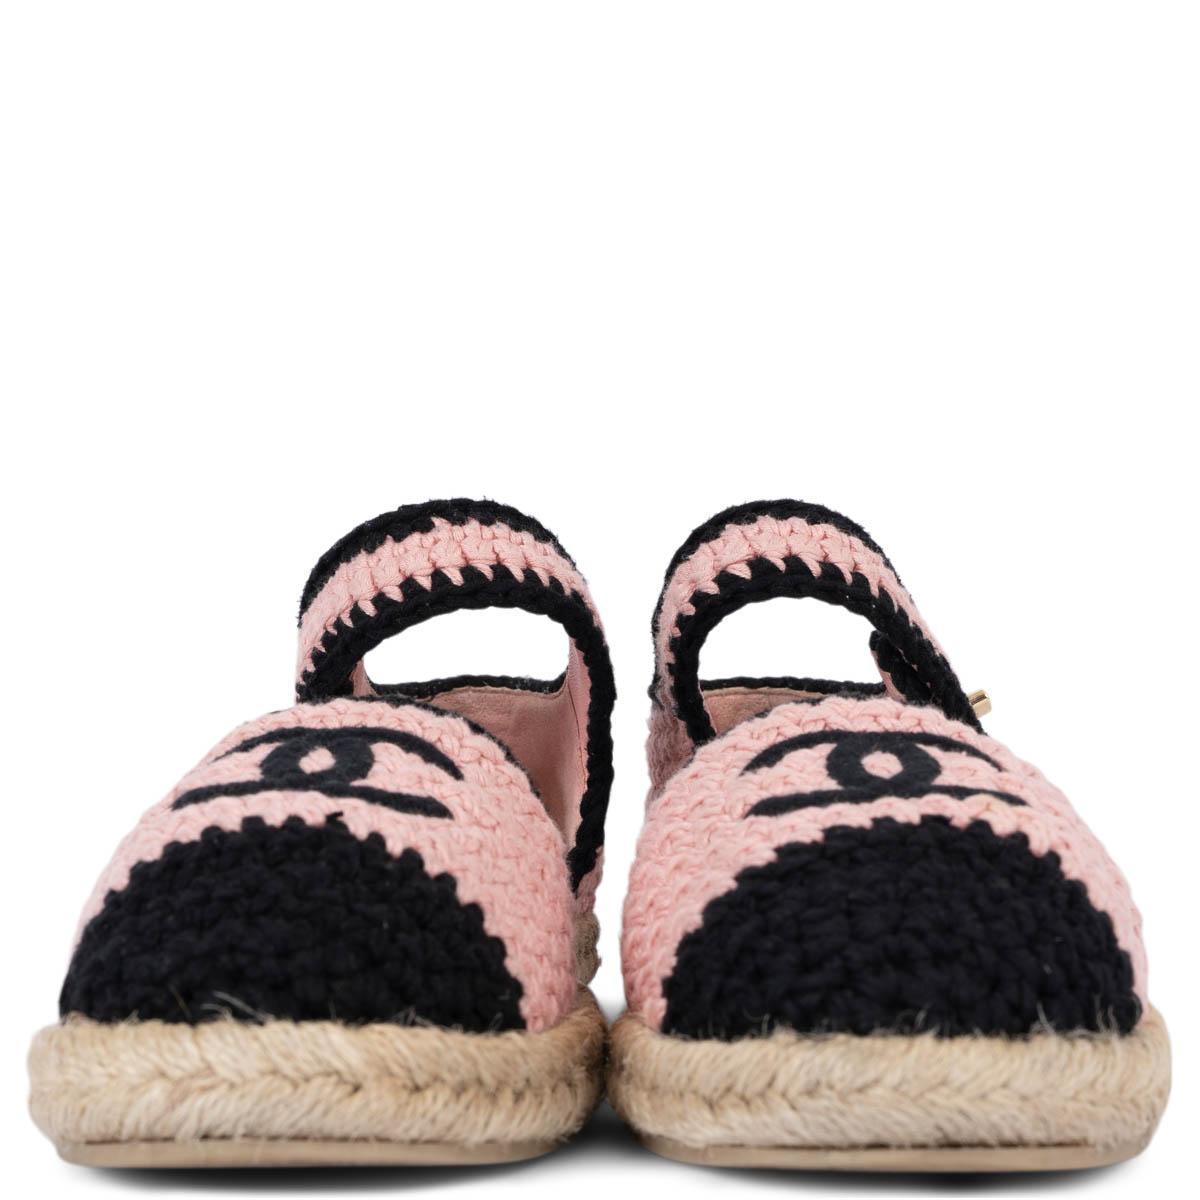 100% authentic Chanel CC braided Mary-Jane espadrilles in light pink and black braided knit with classic beige  raffia sole and gold-tone metal CC turn-lock. Have been worn and are in excellent condition. 

2022 Paris-Dubai